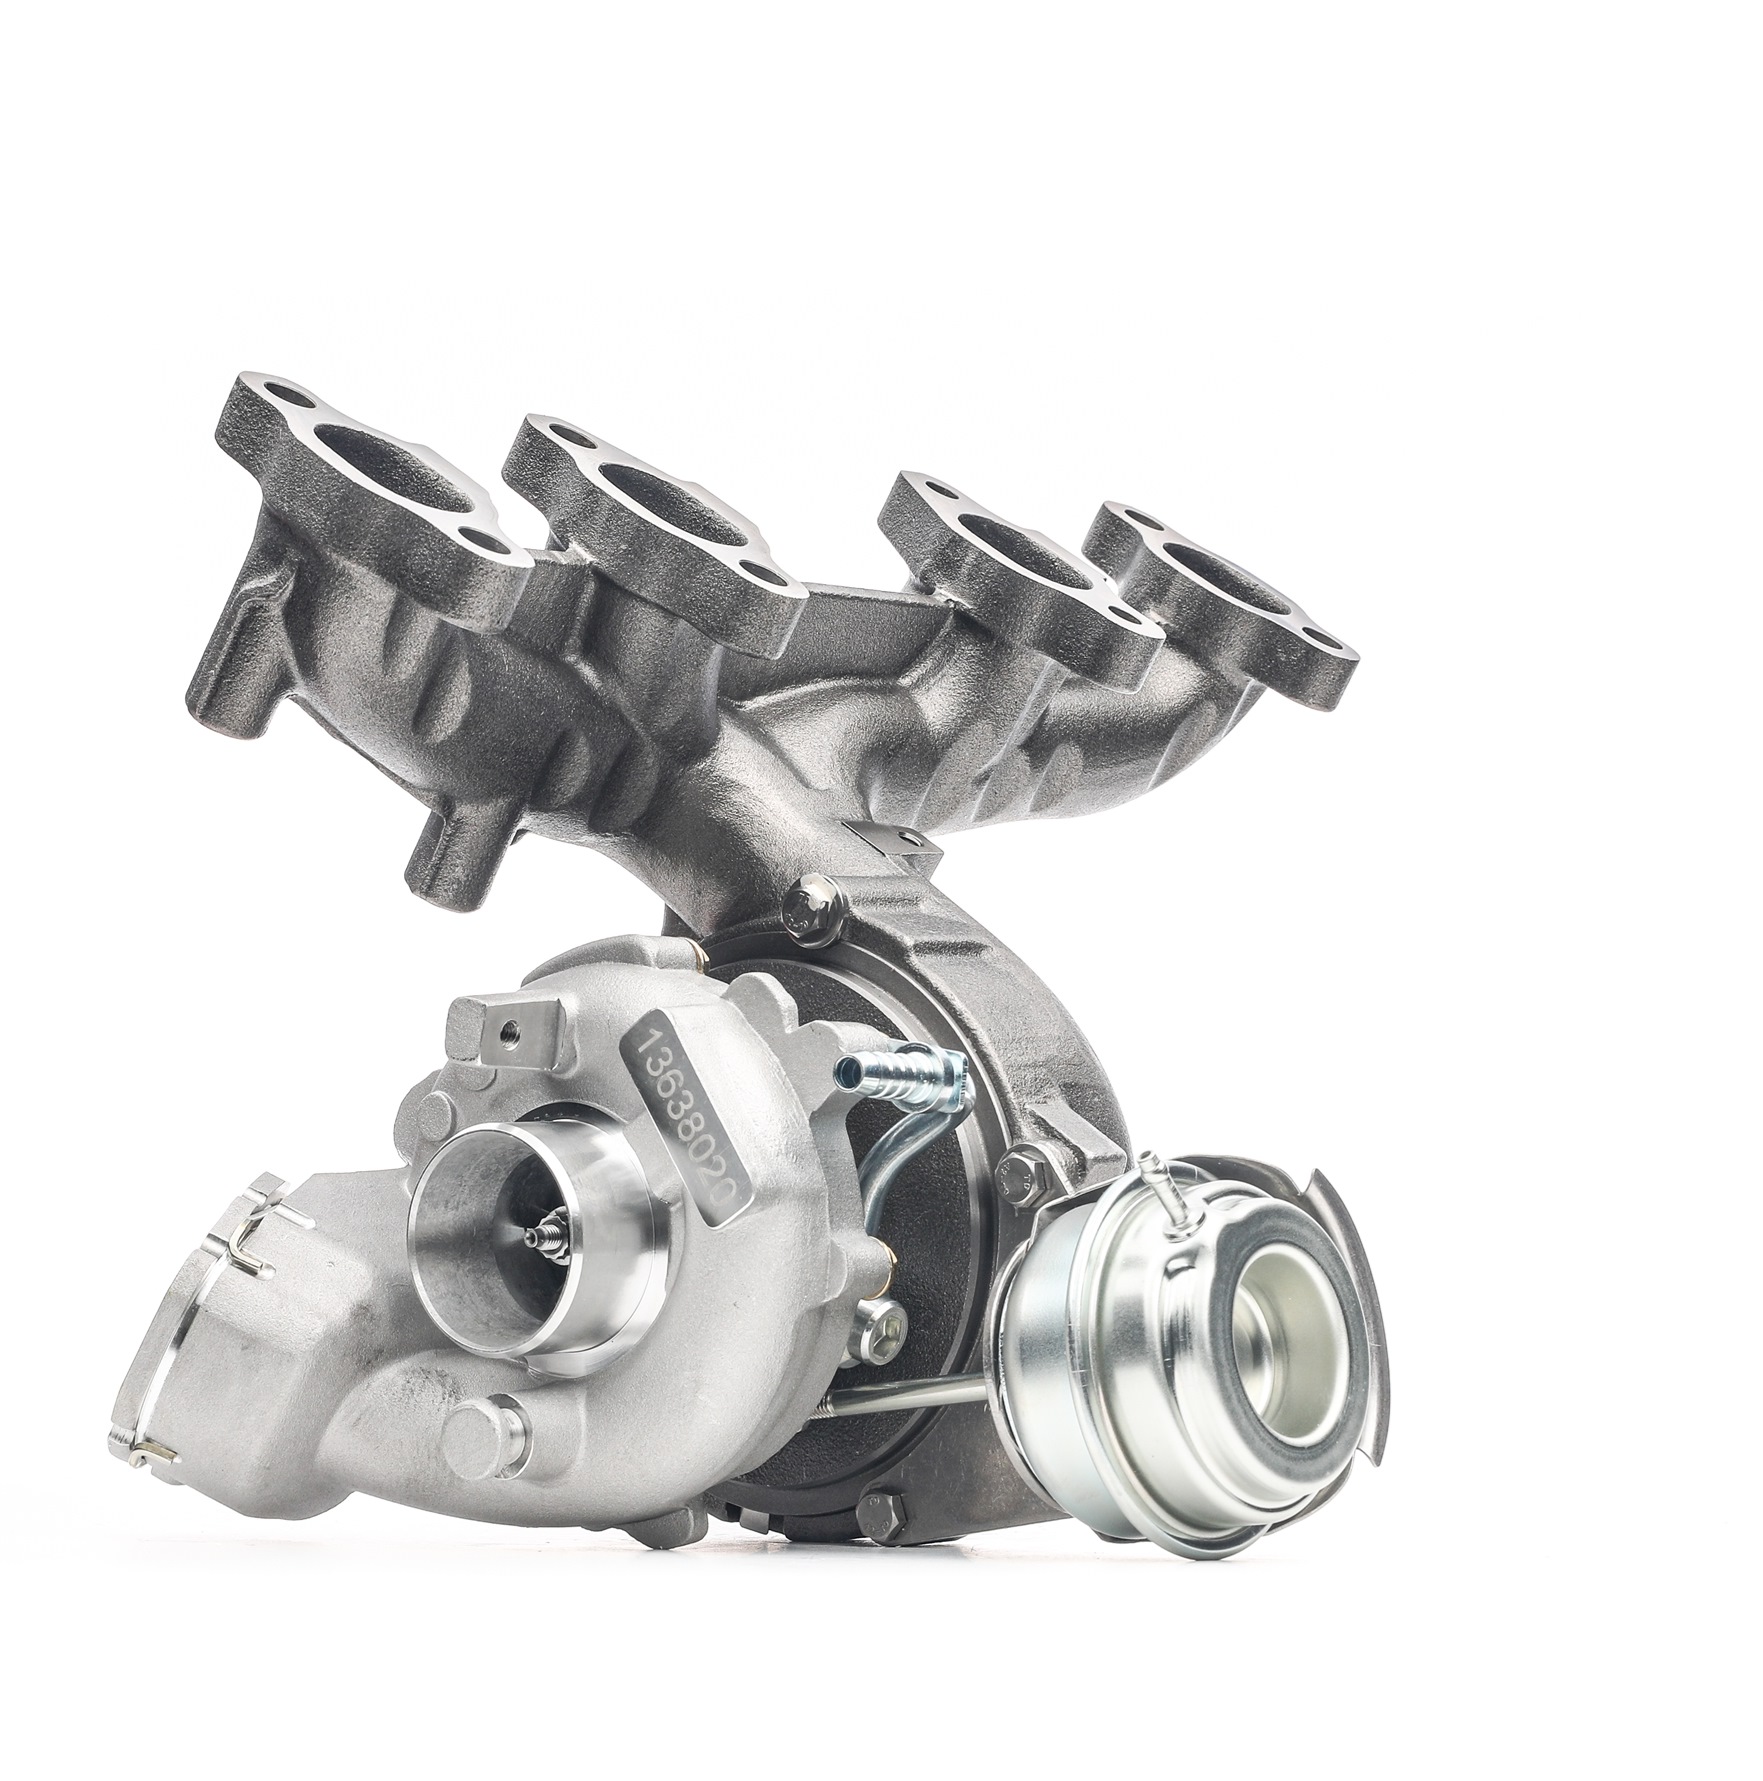 SKCT-1190174 STARK Turbocharger SEAT Exhaust Turbocharger, Diesel, Euro 4, Pneumatic, without attachment material